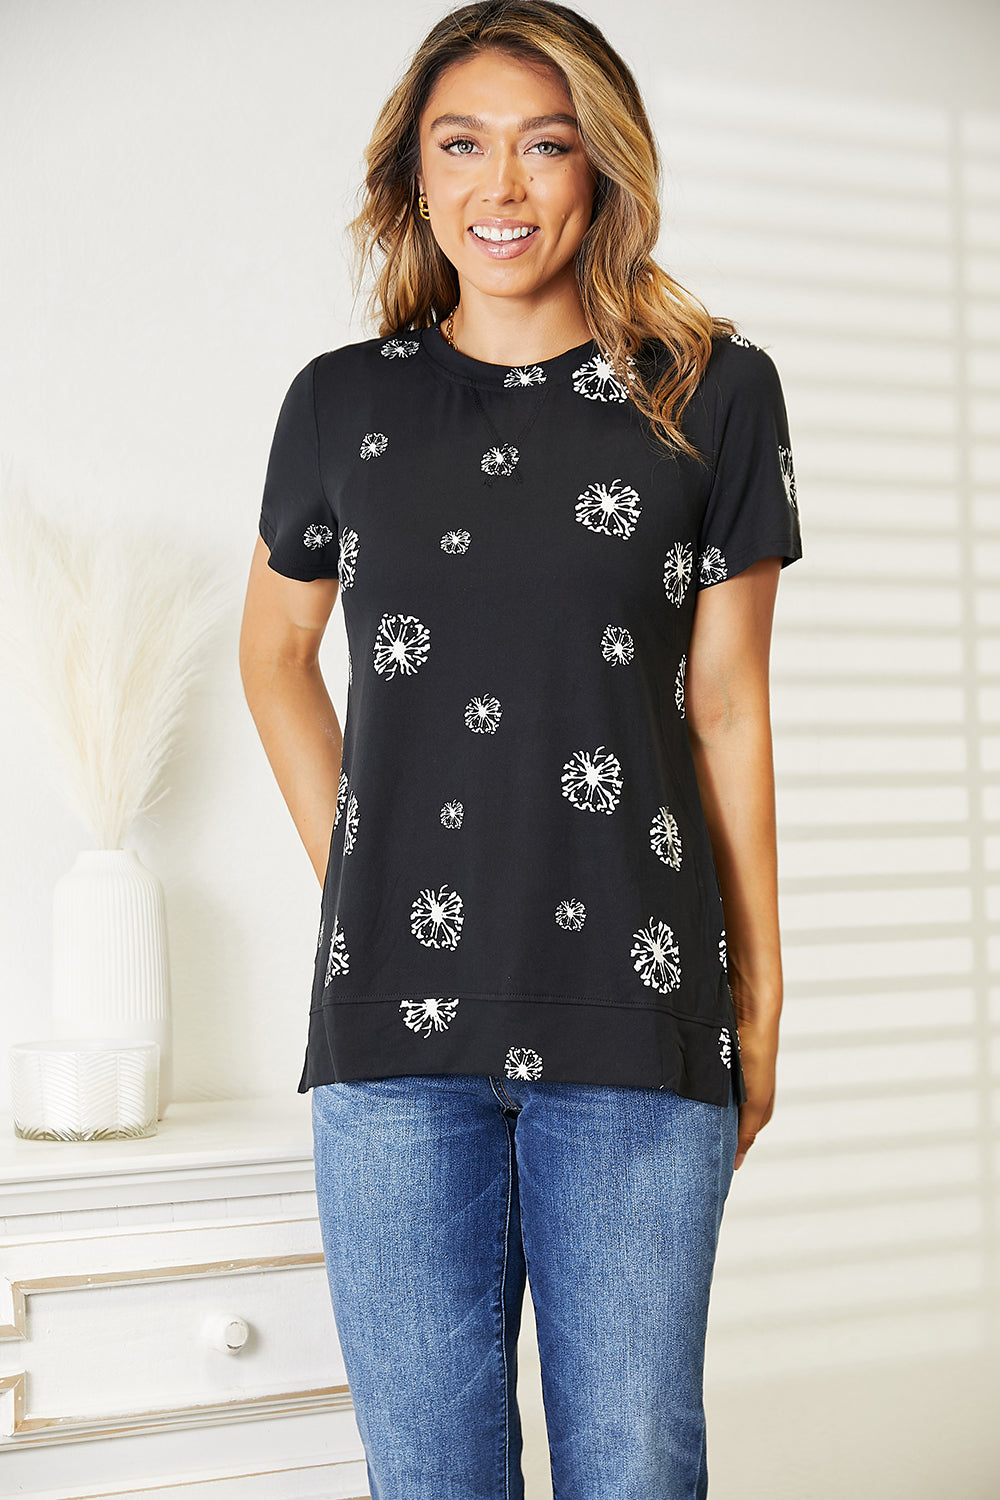 One On One Dandelion Print Round Neck T-Shirt Black Dandelion Printe T-Shirt by Vim&Vigor | Vim&Vigor Boutique